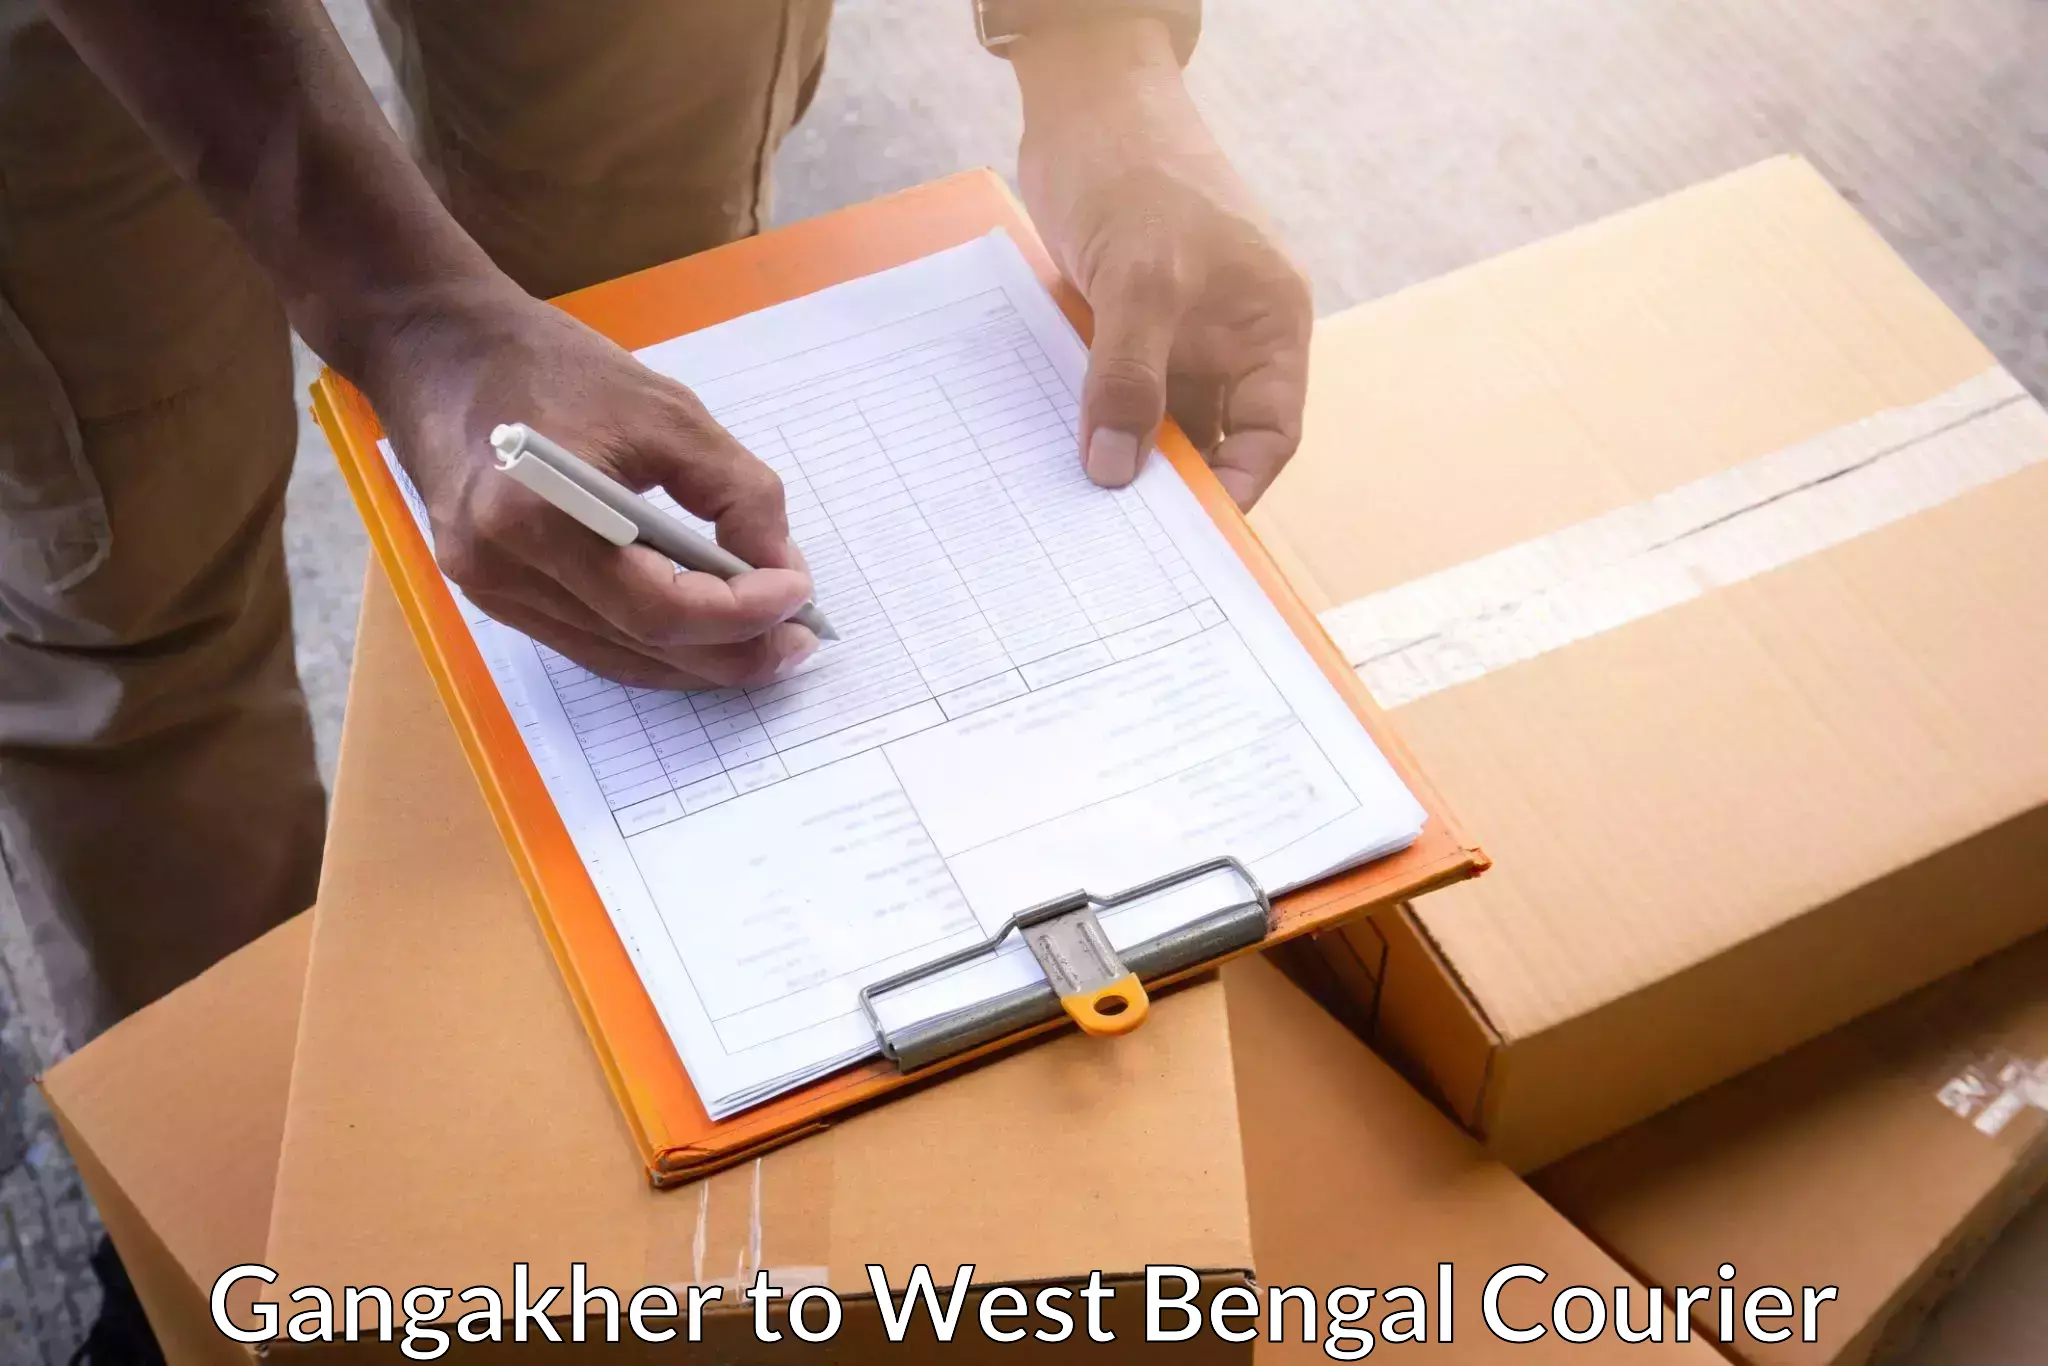 Rapid shipping services Gangakher to Bagdogra